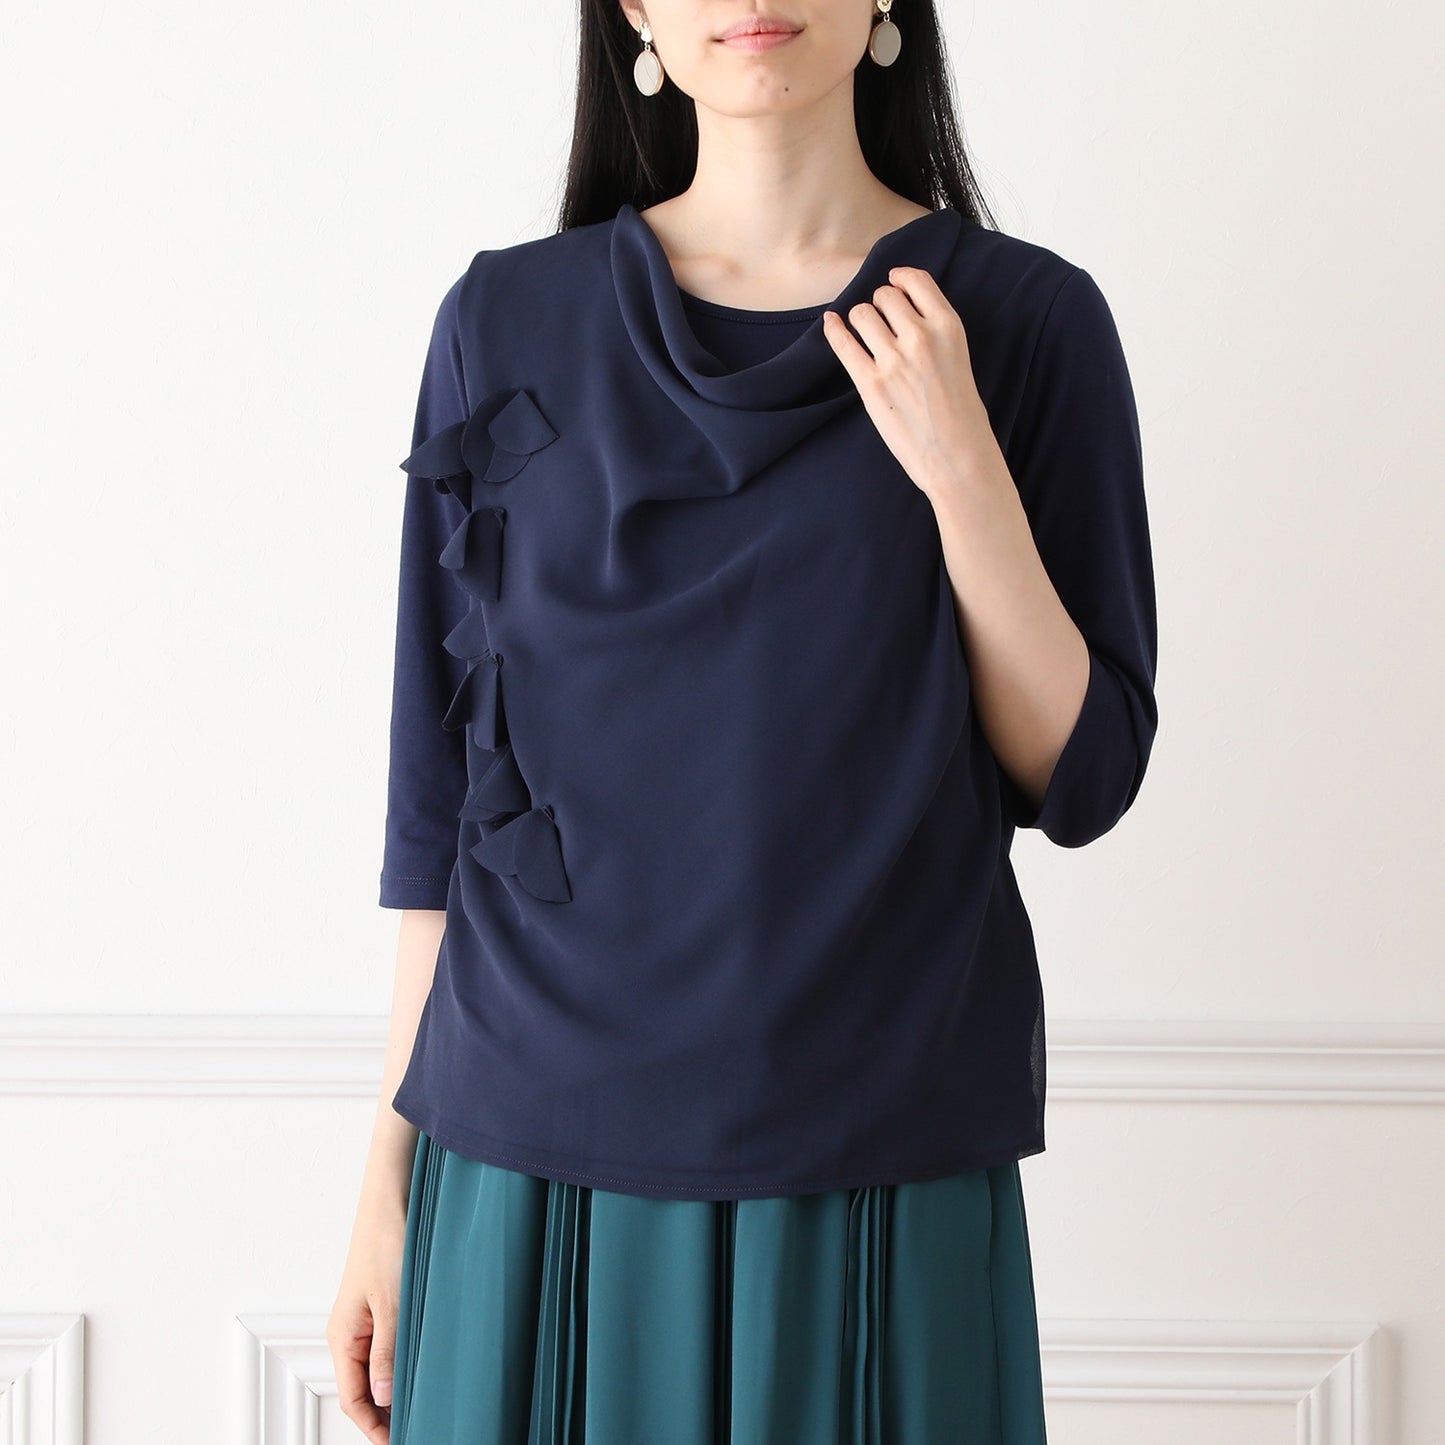 Petal Accent Blouse in Night Blue Chiffon